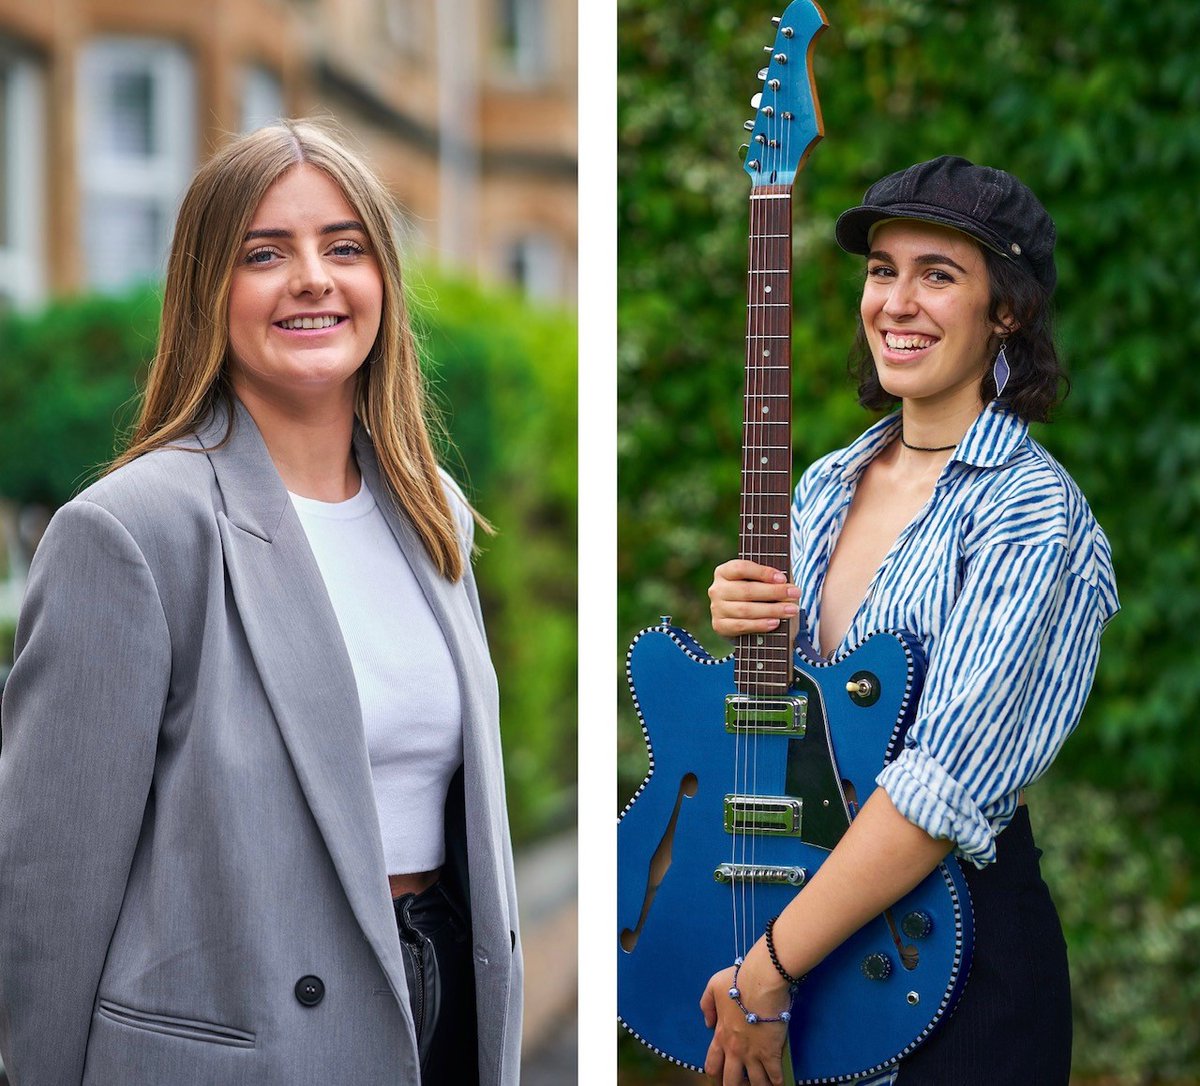 #News | #UHIPerth students Kirsty Stewart and #LolaElviraDorado have each been awarded a John Preston Music Award which supports emerging talent within the music industry.🔗bit.ly/3LefKNo #UHIPerth #ThinkUHI #Music #MusicBusiness #PopularMusic #Talent @LCMusicFund 🎶